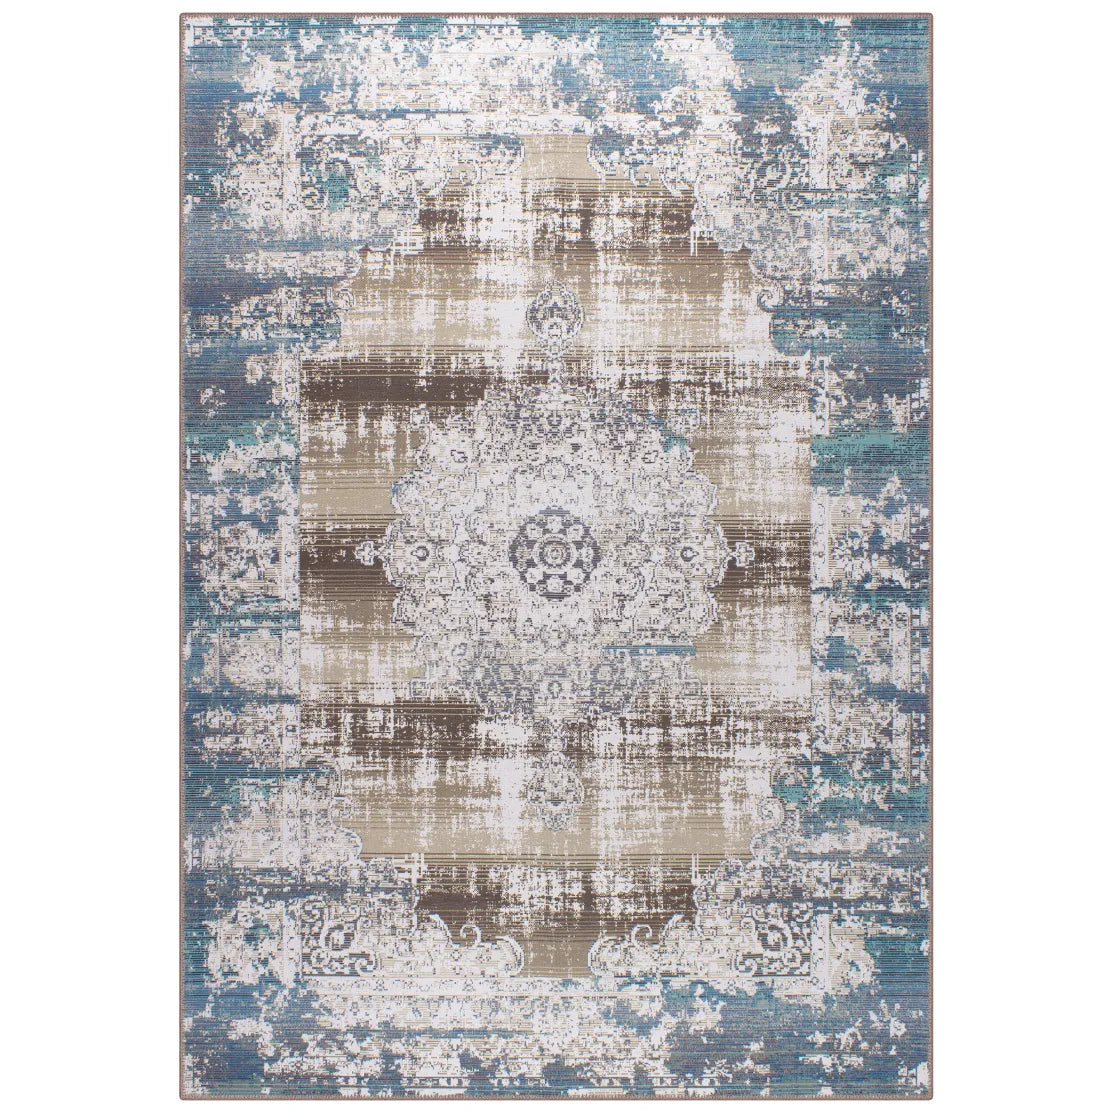 /products/agean-machine-washable-area-rug-green-brown